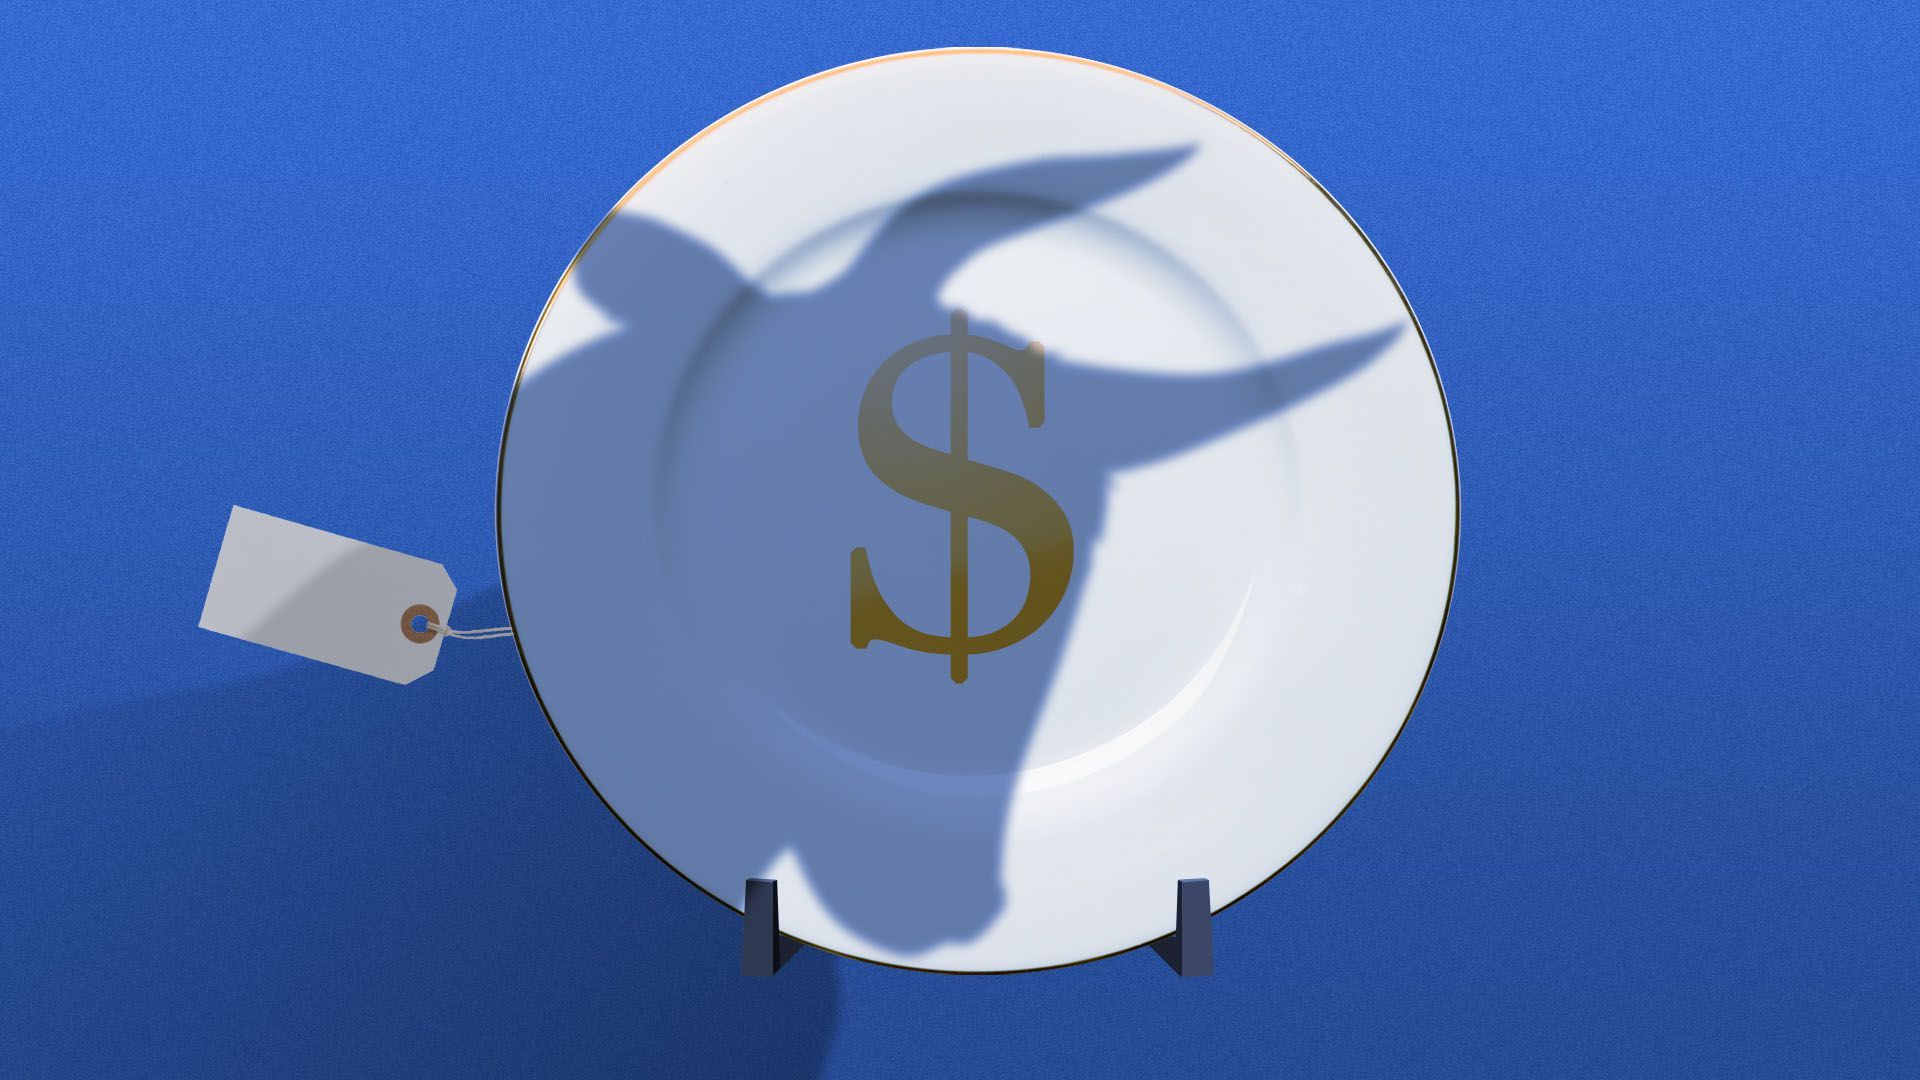 Illustration of a bull casting a shadow onto a plate in a china shop with a dollar sign in it.